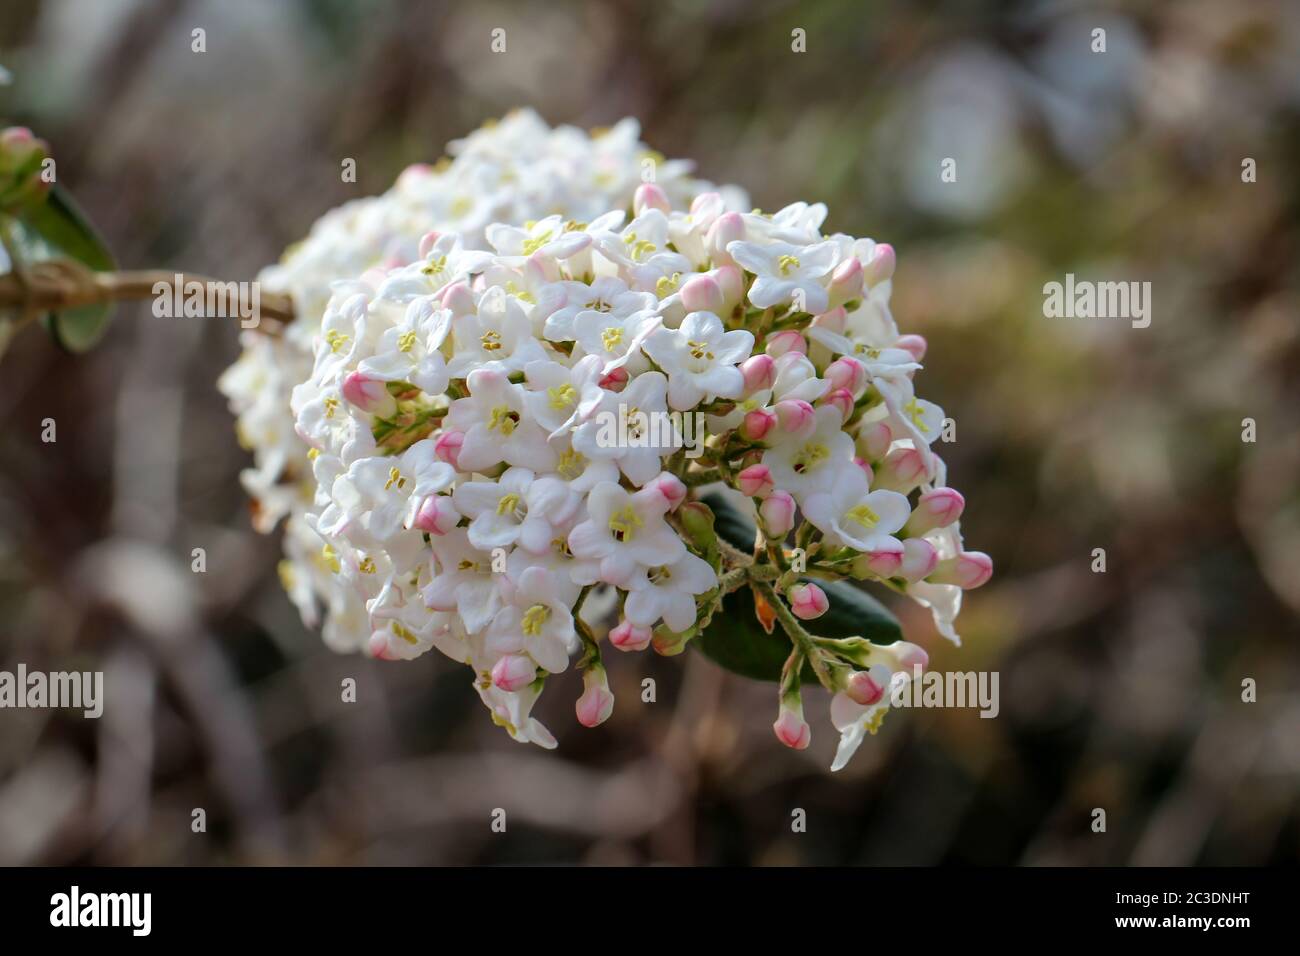 beautiful white flowers on a bush or tree Stock Photo